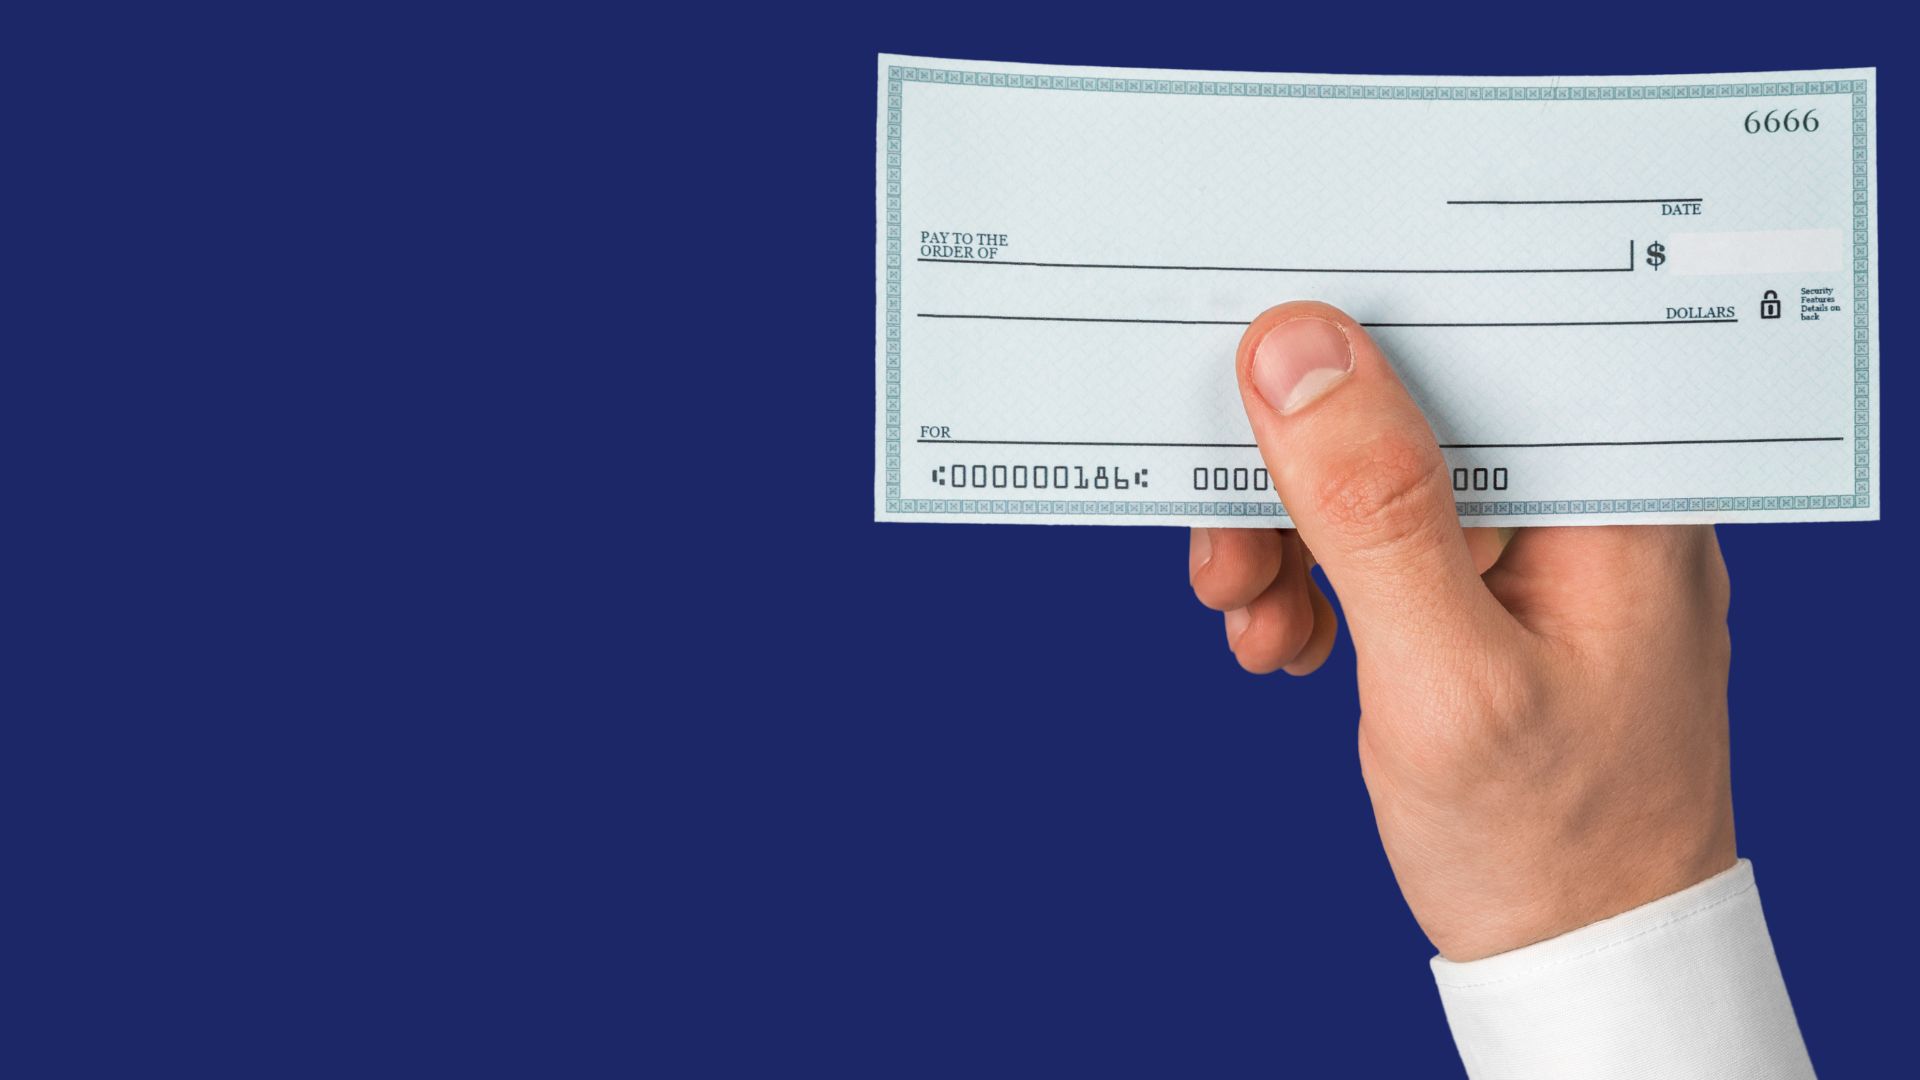 cheque emploi service combien dheures